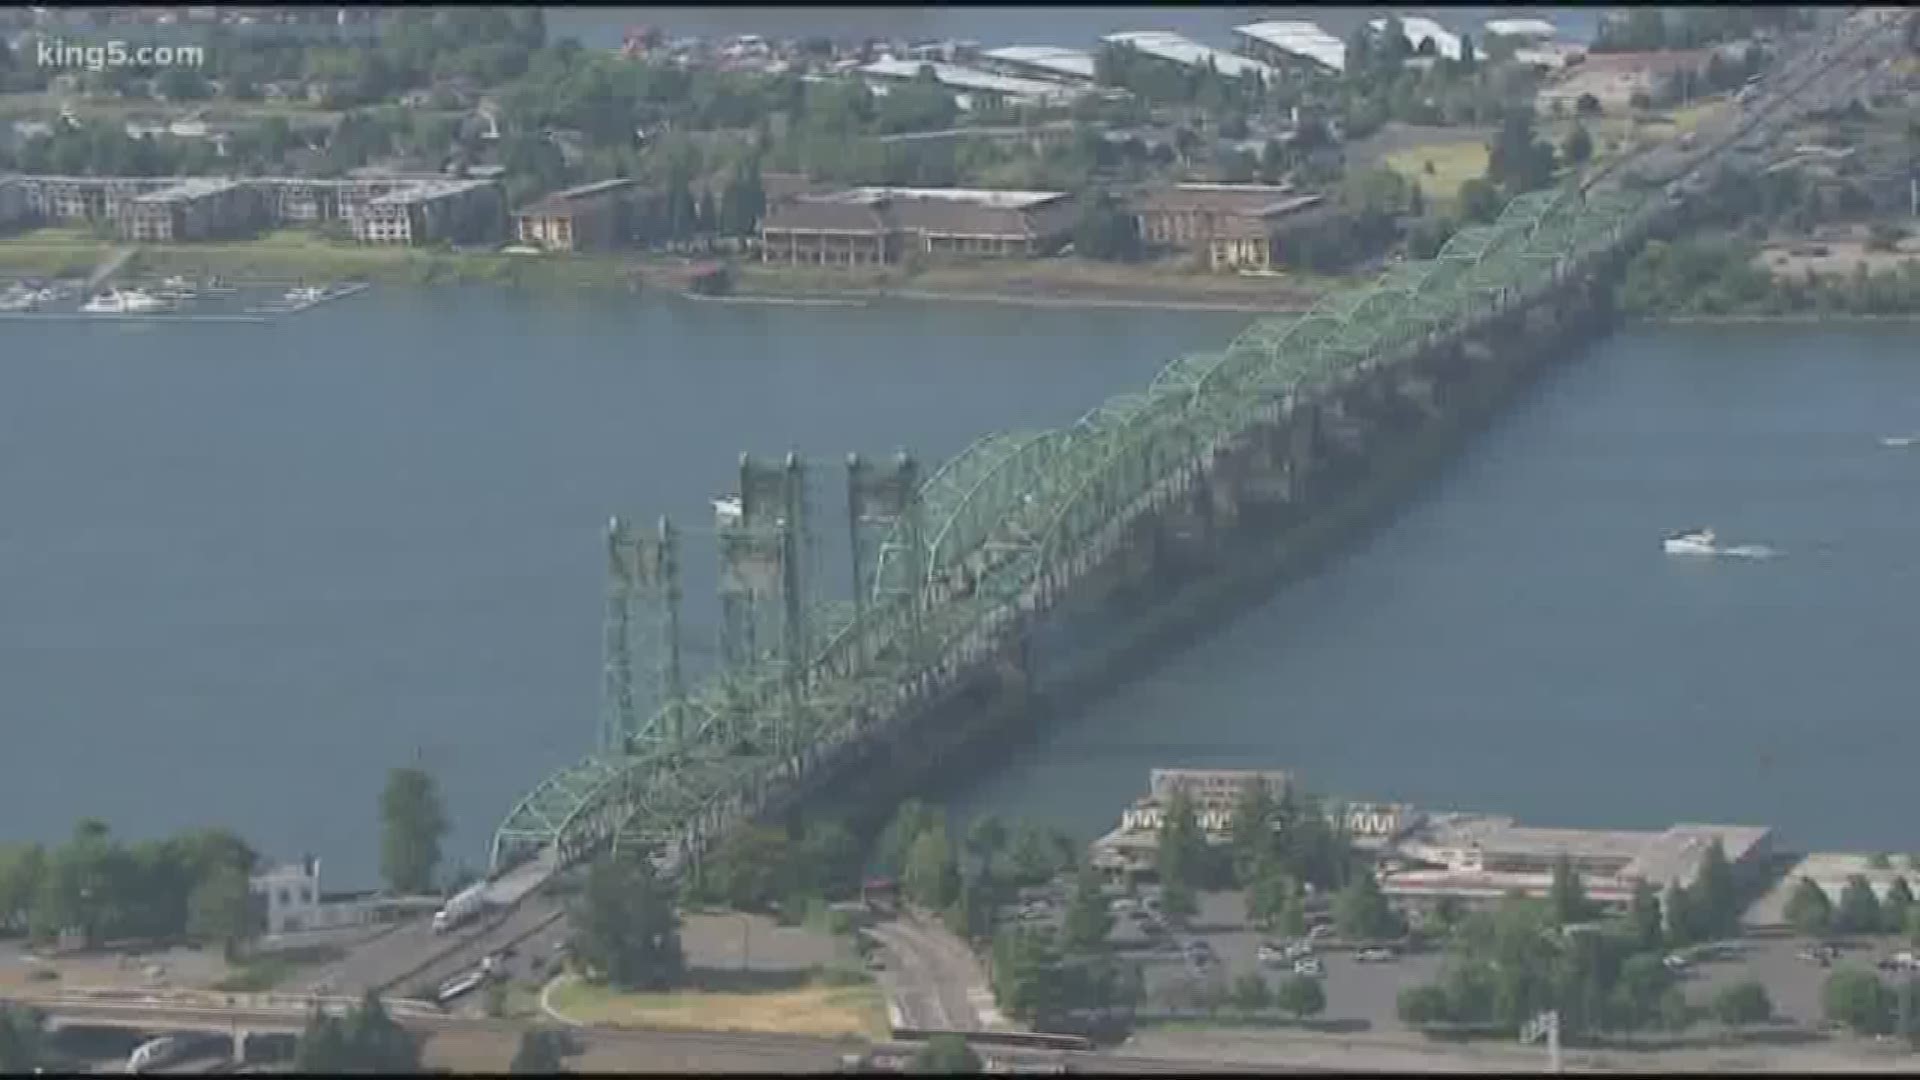 Washington Gov. Jay Inslee and Oregon Gov. Kate Brown signed an agreement Monday to work together to replace the Interstate 5 Bridge that connects their two states.